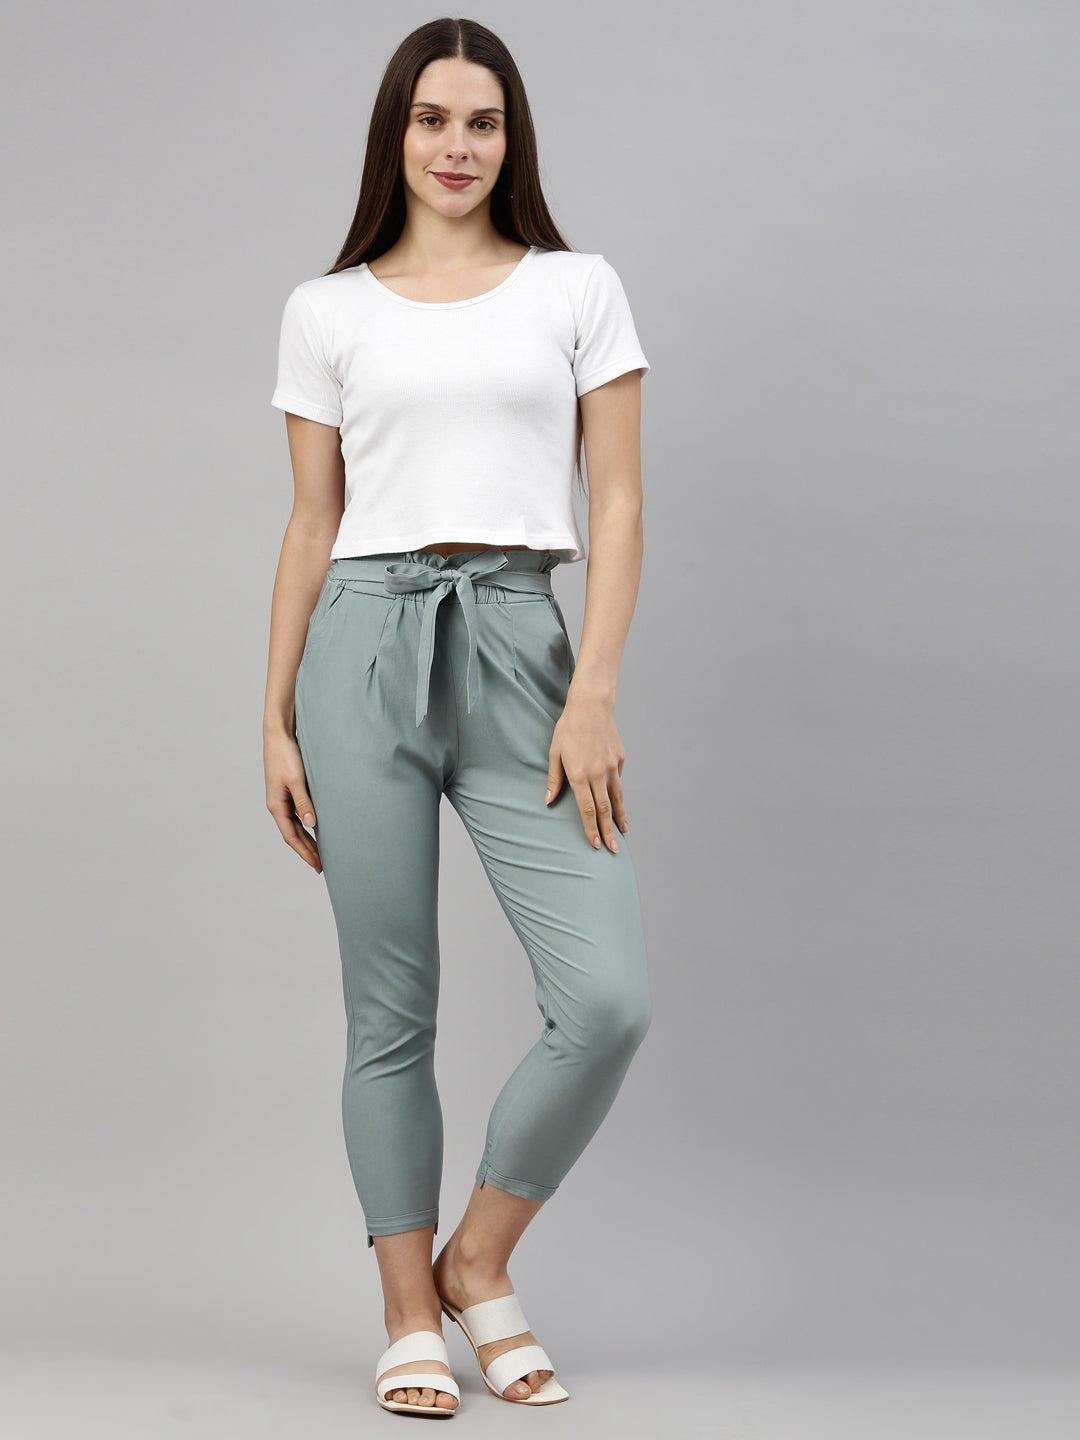 Overlap Pants With Tie-up Knot – Leela By A